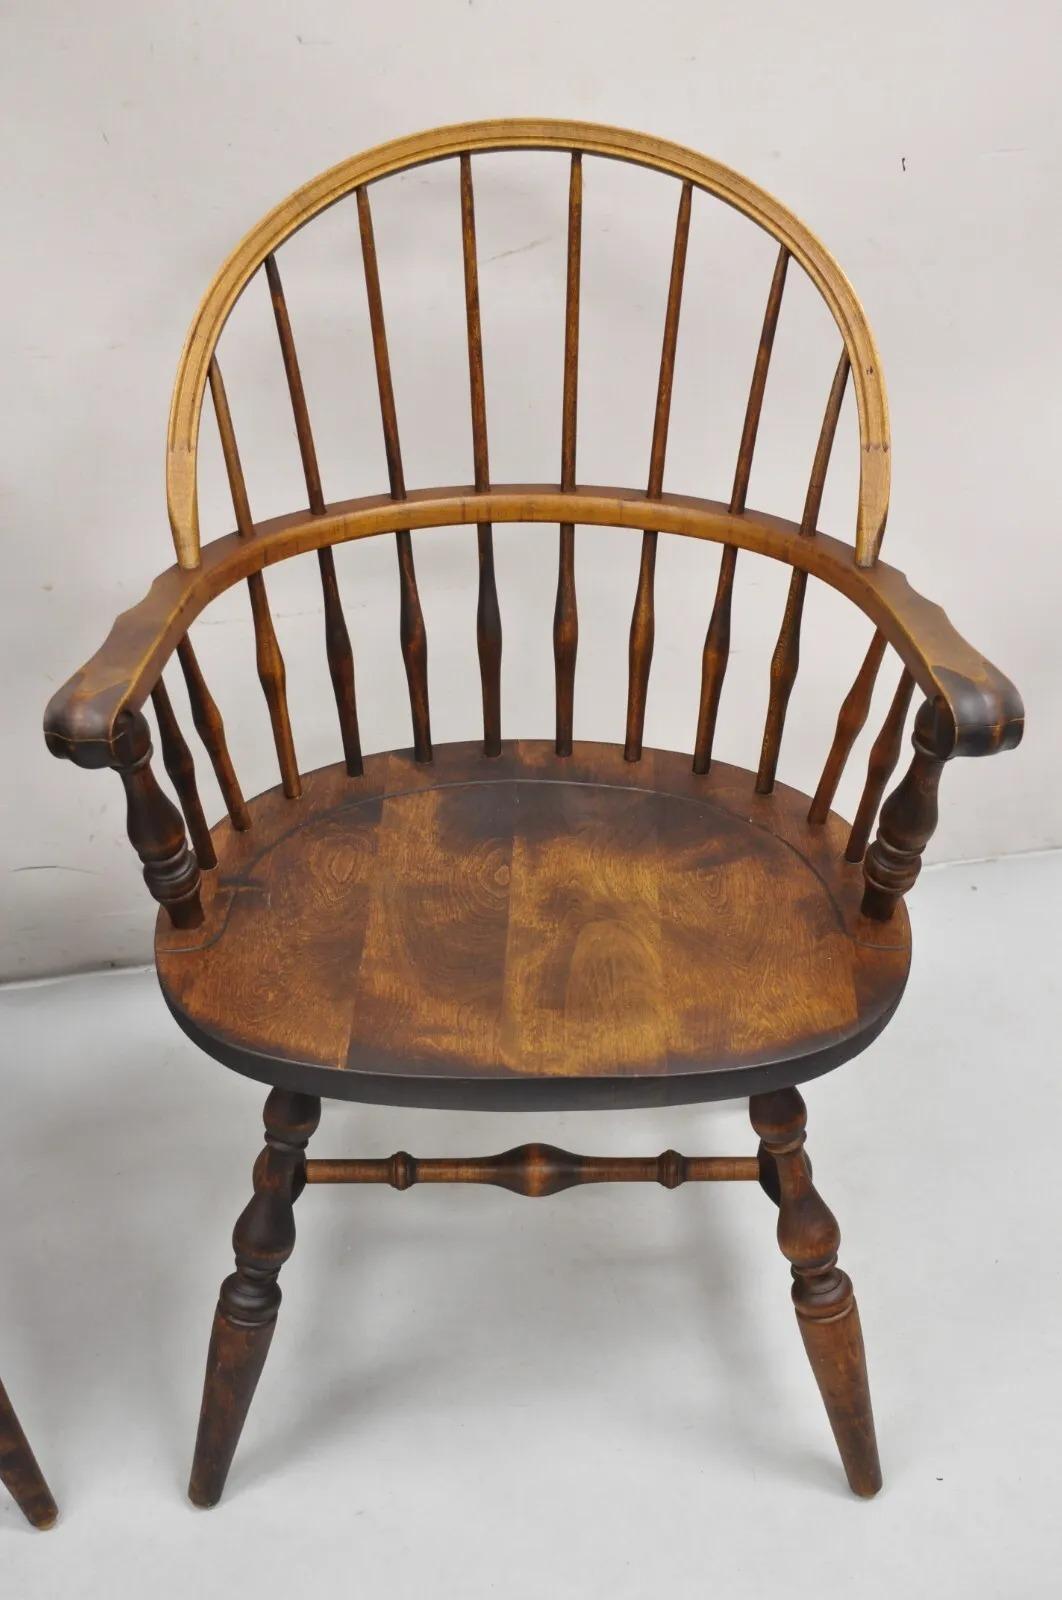 American Colonial Nichols & Stone Rock Maple Wood Bowback Colonial Windsor Arm Chairs - a Pair For Sale